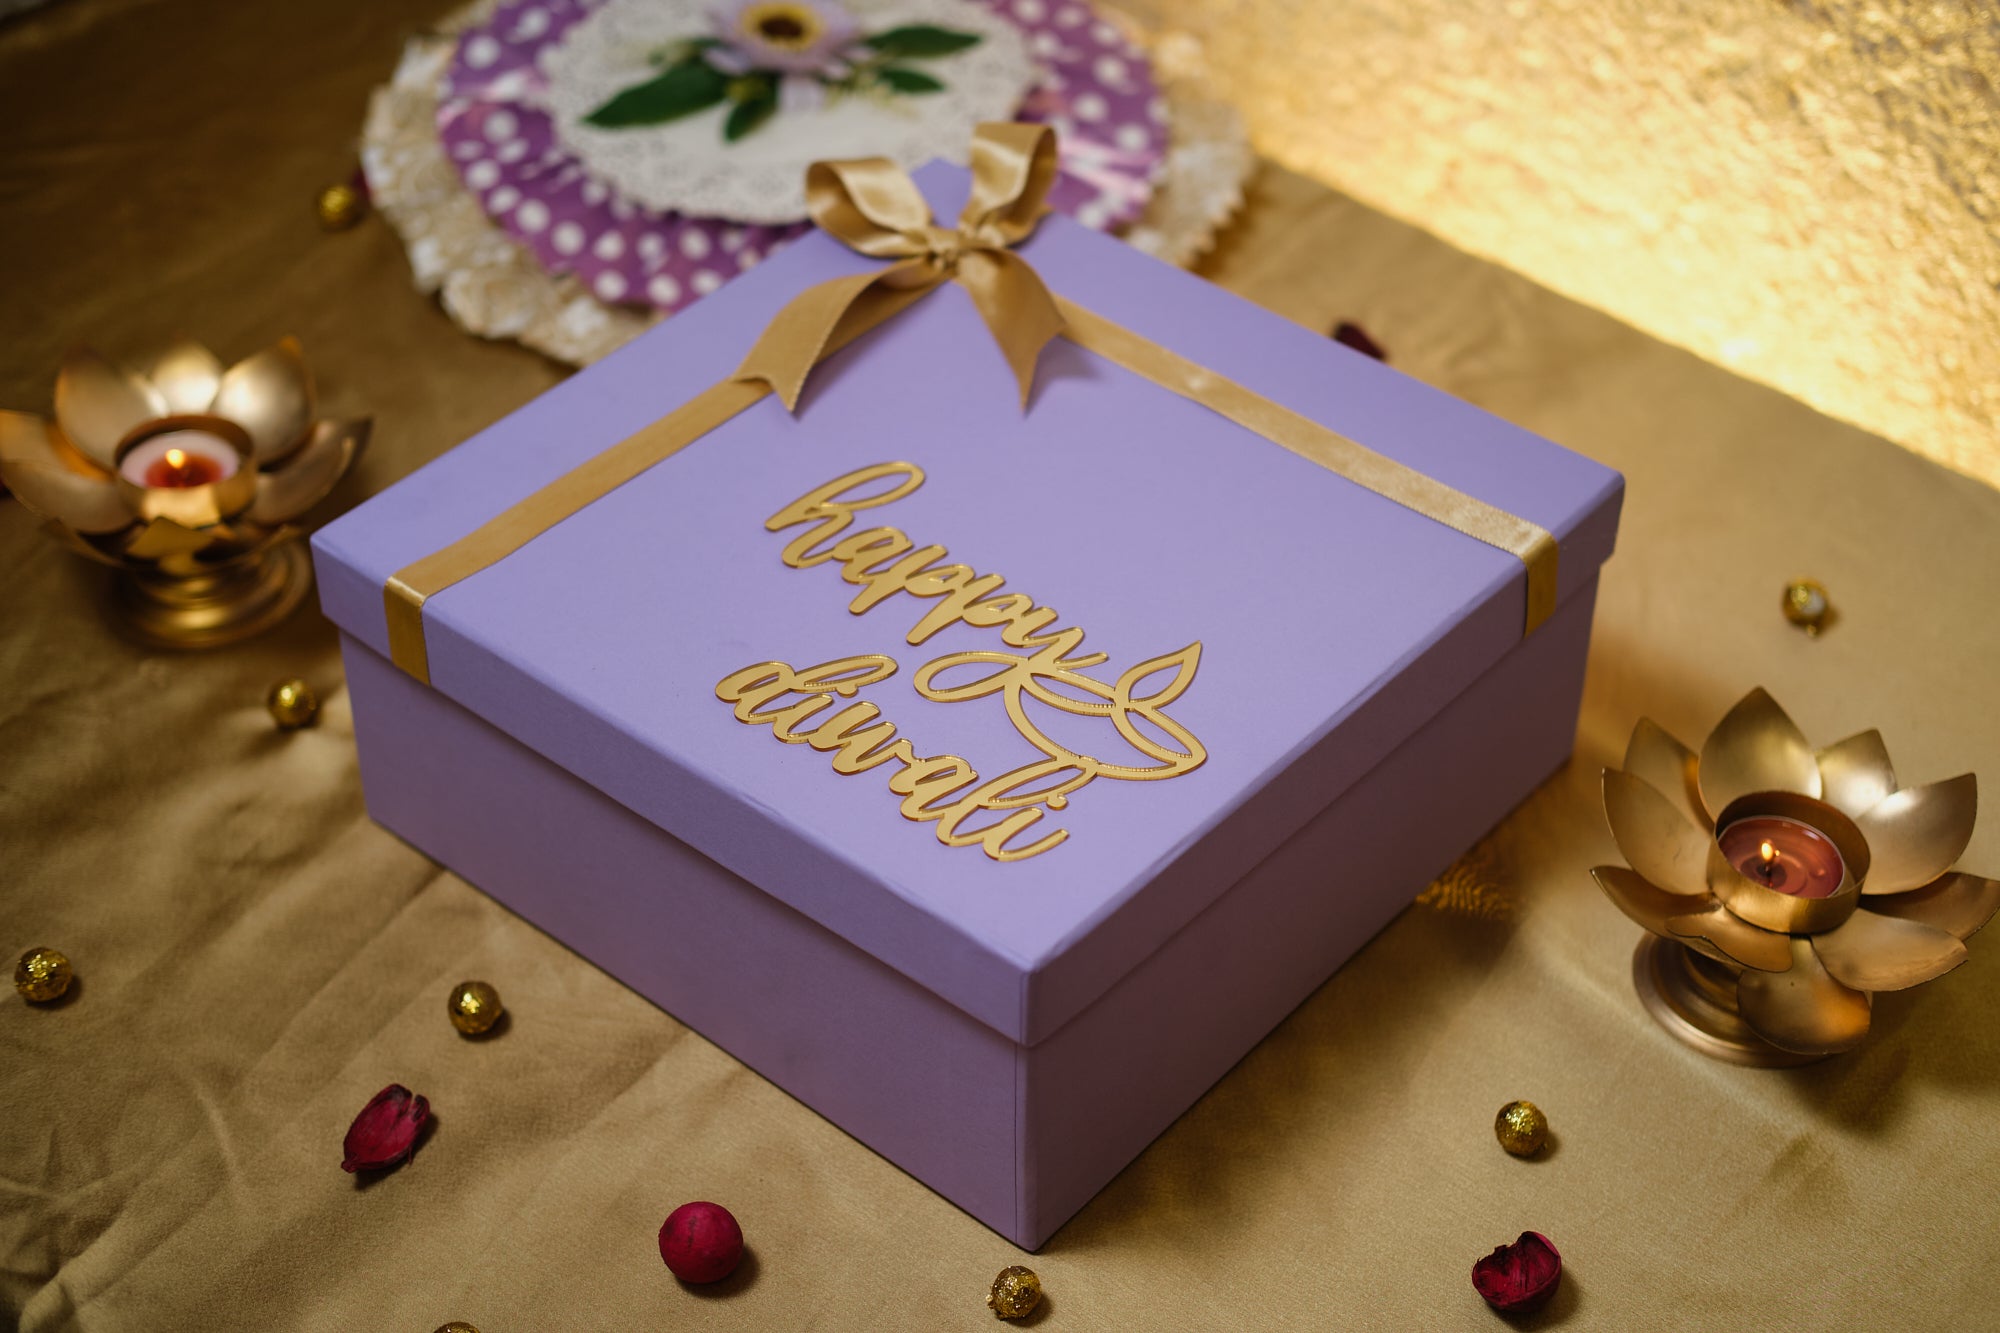 Diwali Box: Over 4,998 Royalty-Free Licensable Stock Photos | Shutterstock